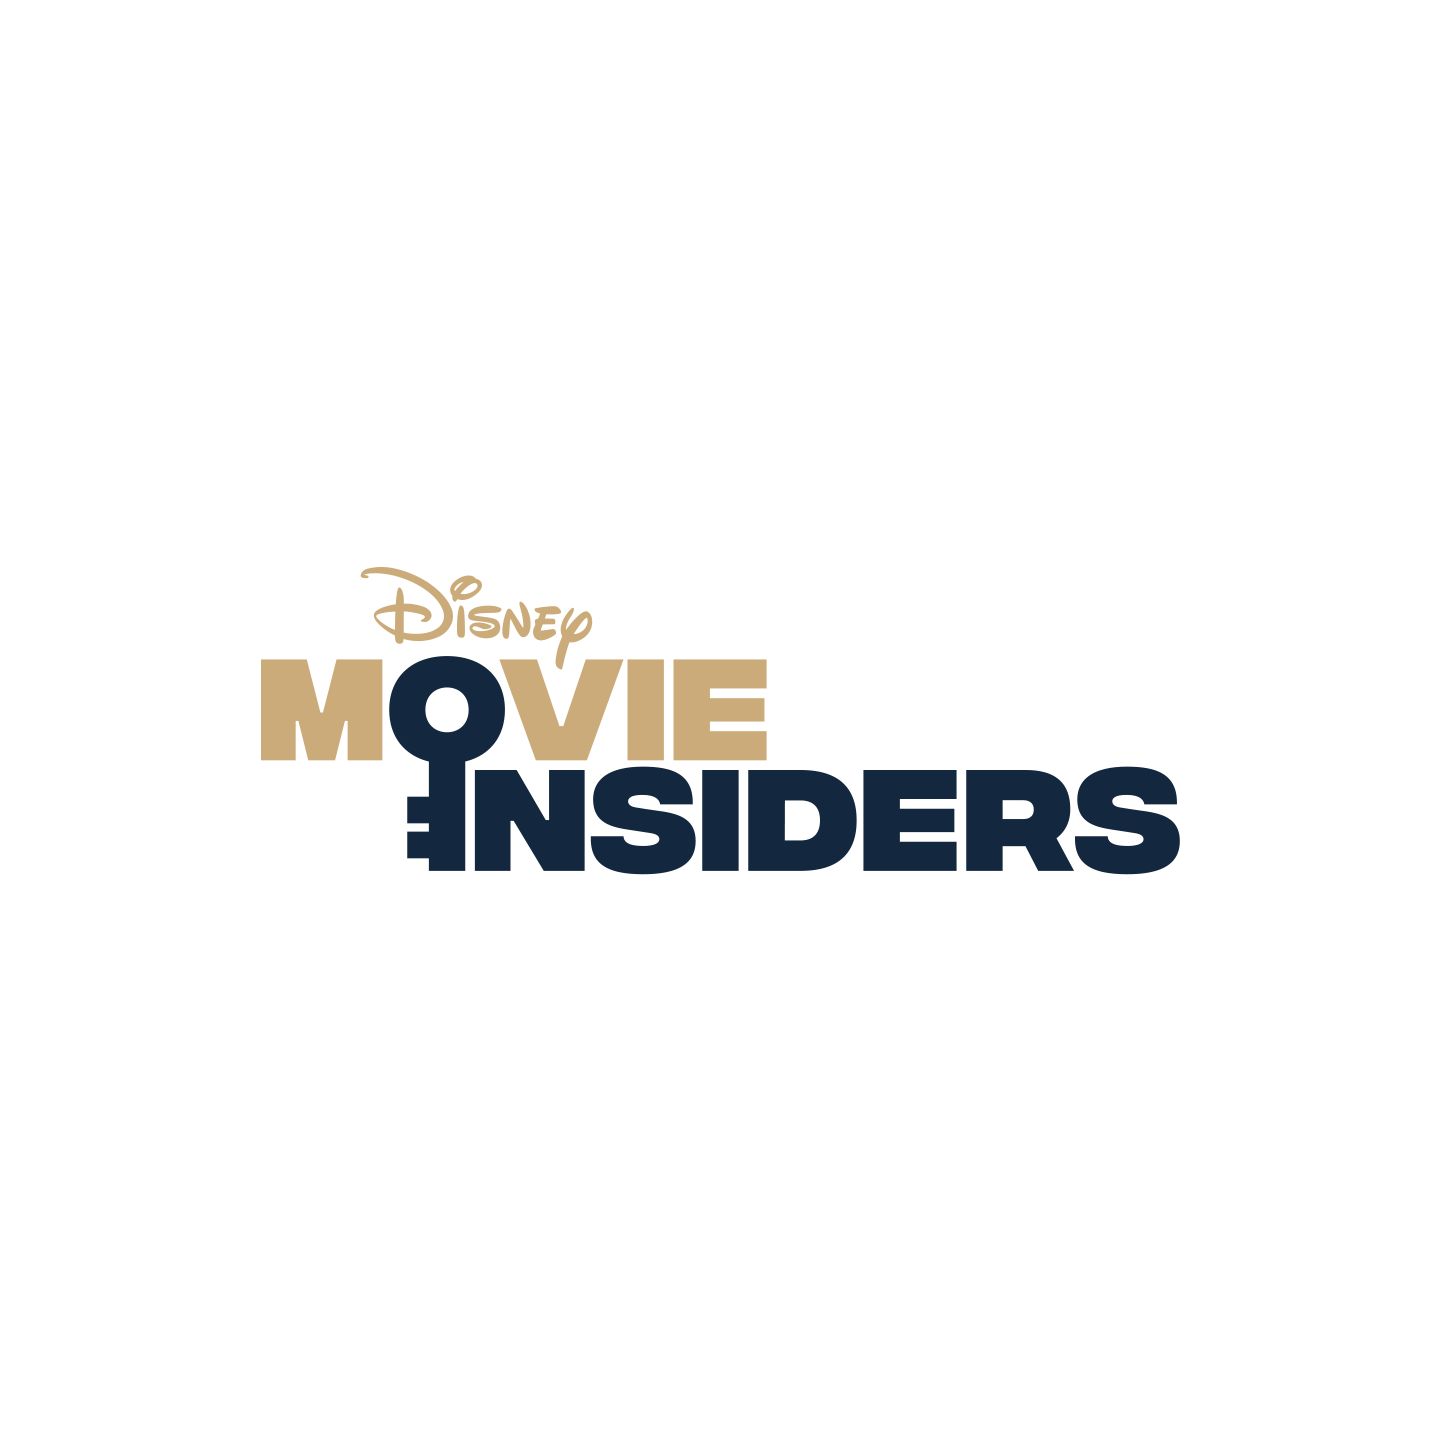 Disney Movie Insiders presents NatGeo Critter Fixers: Country Vets | Live from the Essence Festival of Culture, we talked to Dr. Terrence Ferguson and Dr. Vernard Hodges. | LISTEN NOW